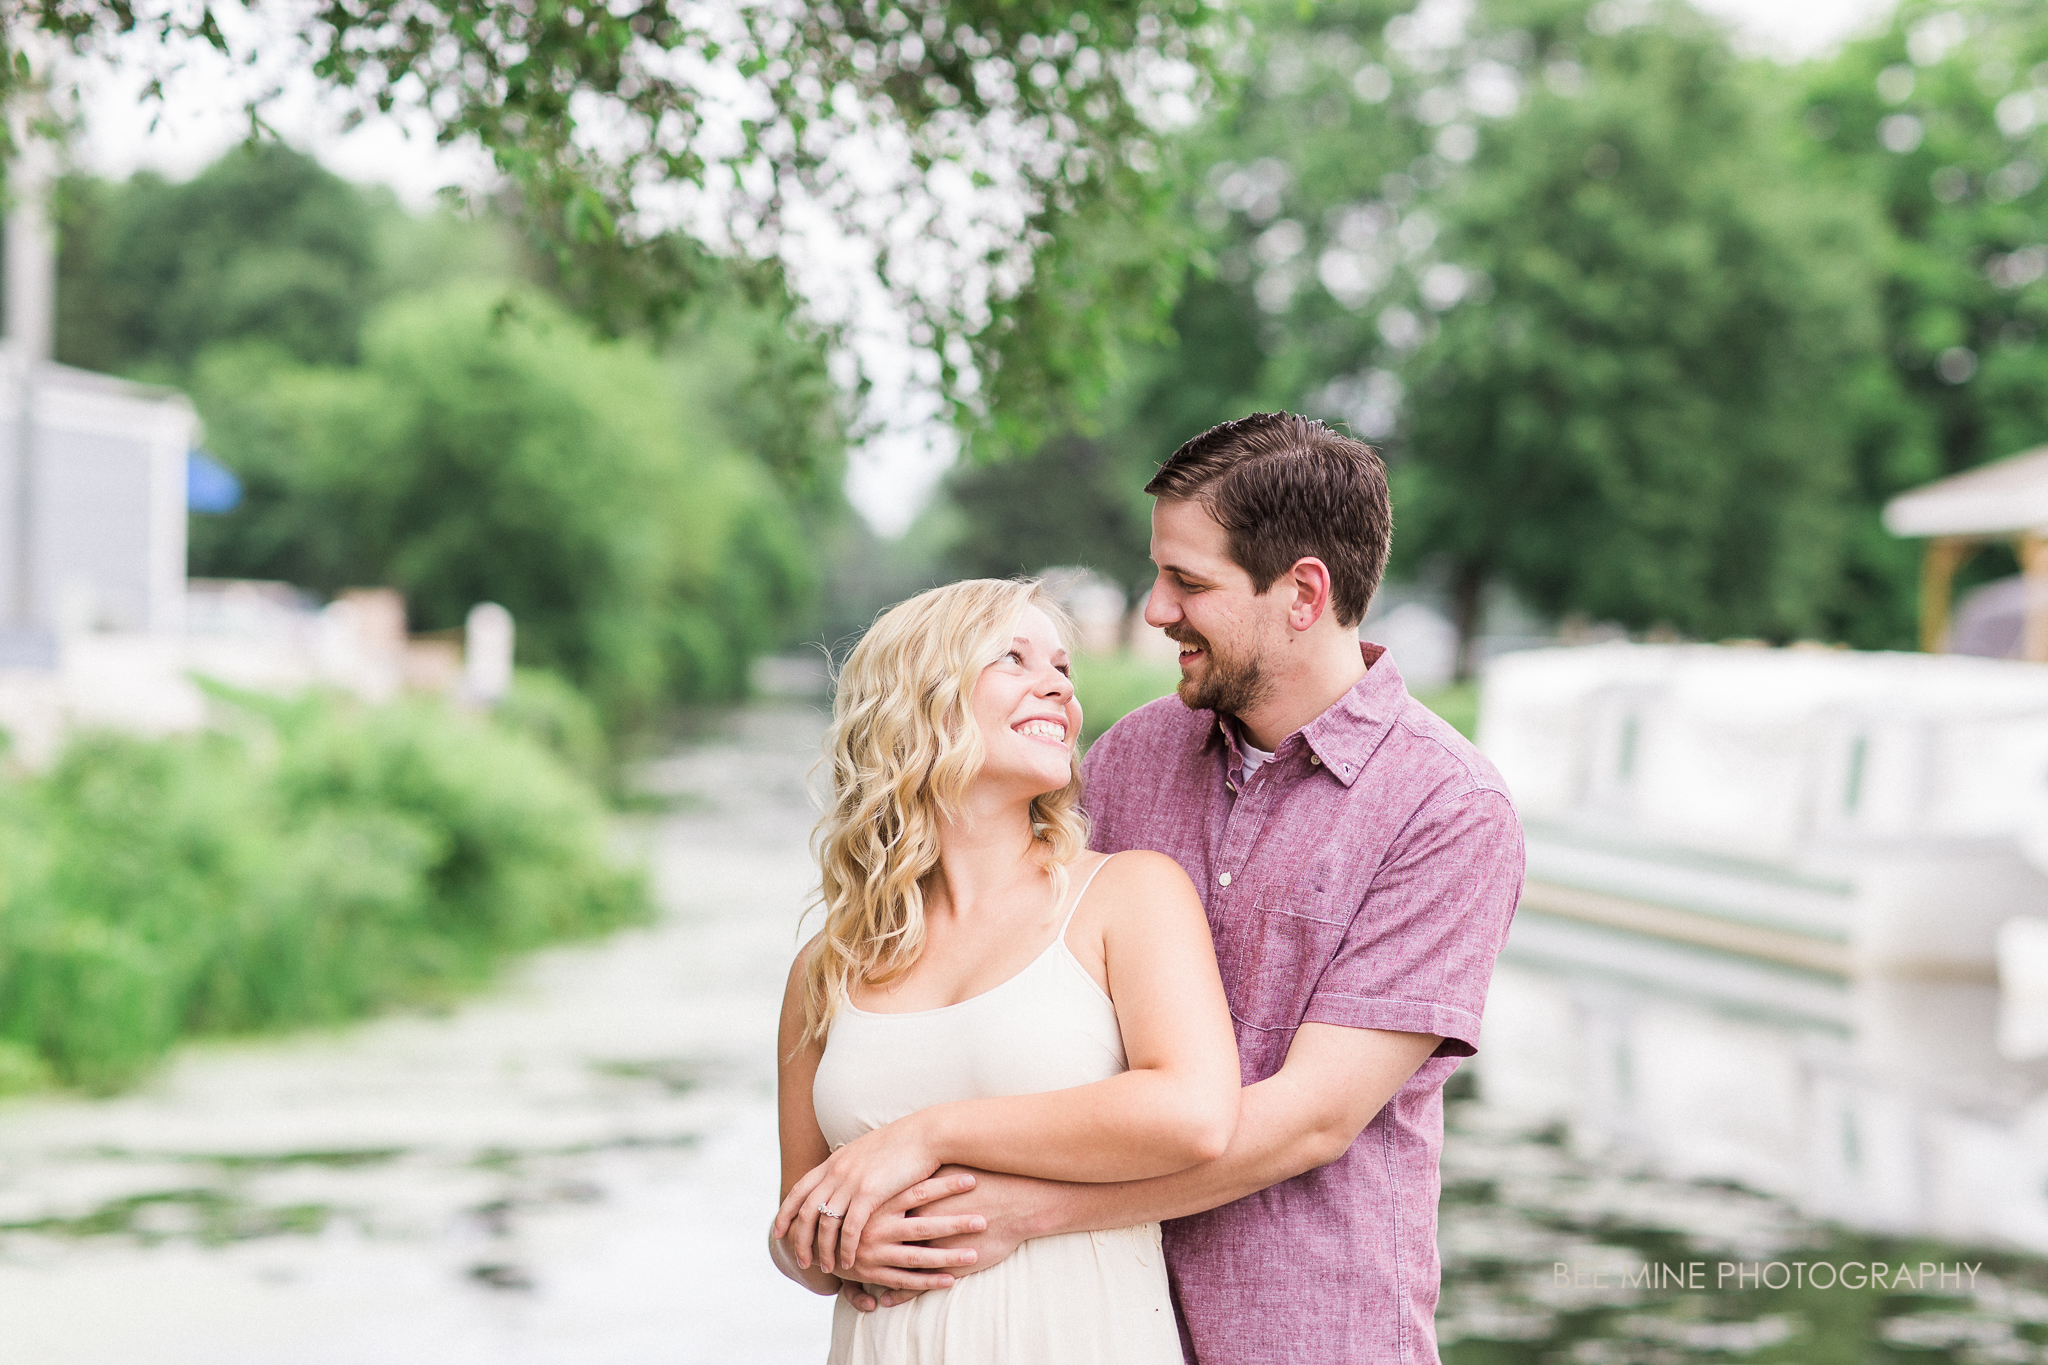 BEE MINE PHOTOGRAPHY // engagement photography, couples pictures, river engagement, canal fulton ohio, canton ohio, cleveland wedding photographer, canton ohio wedding photographer